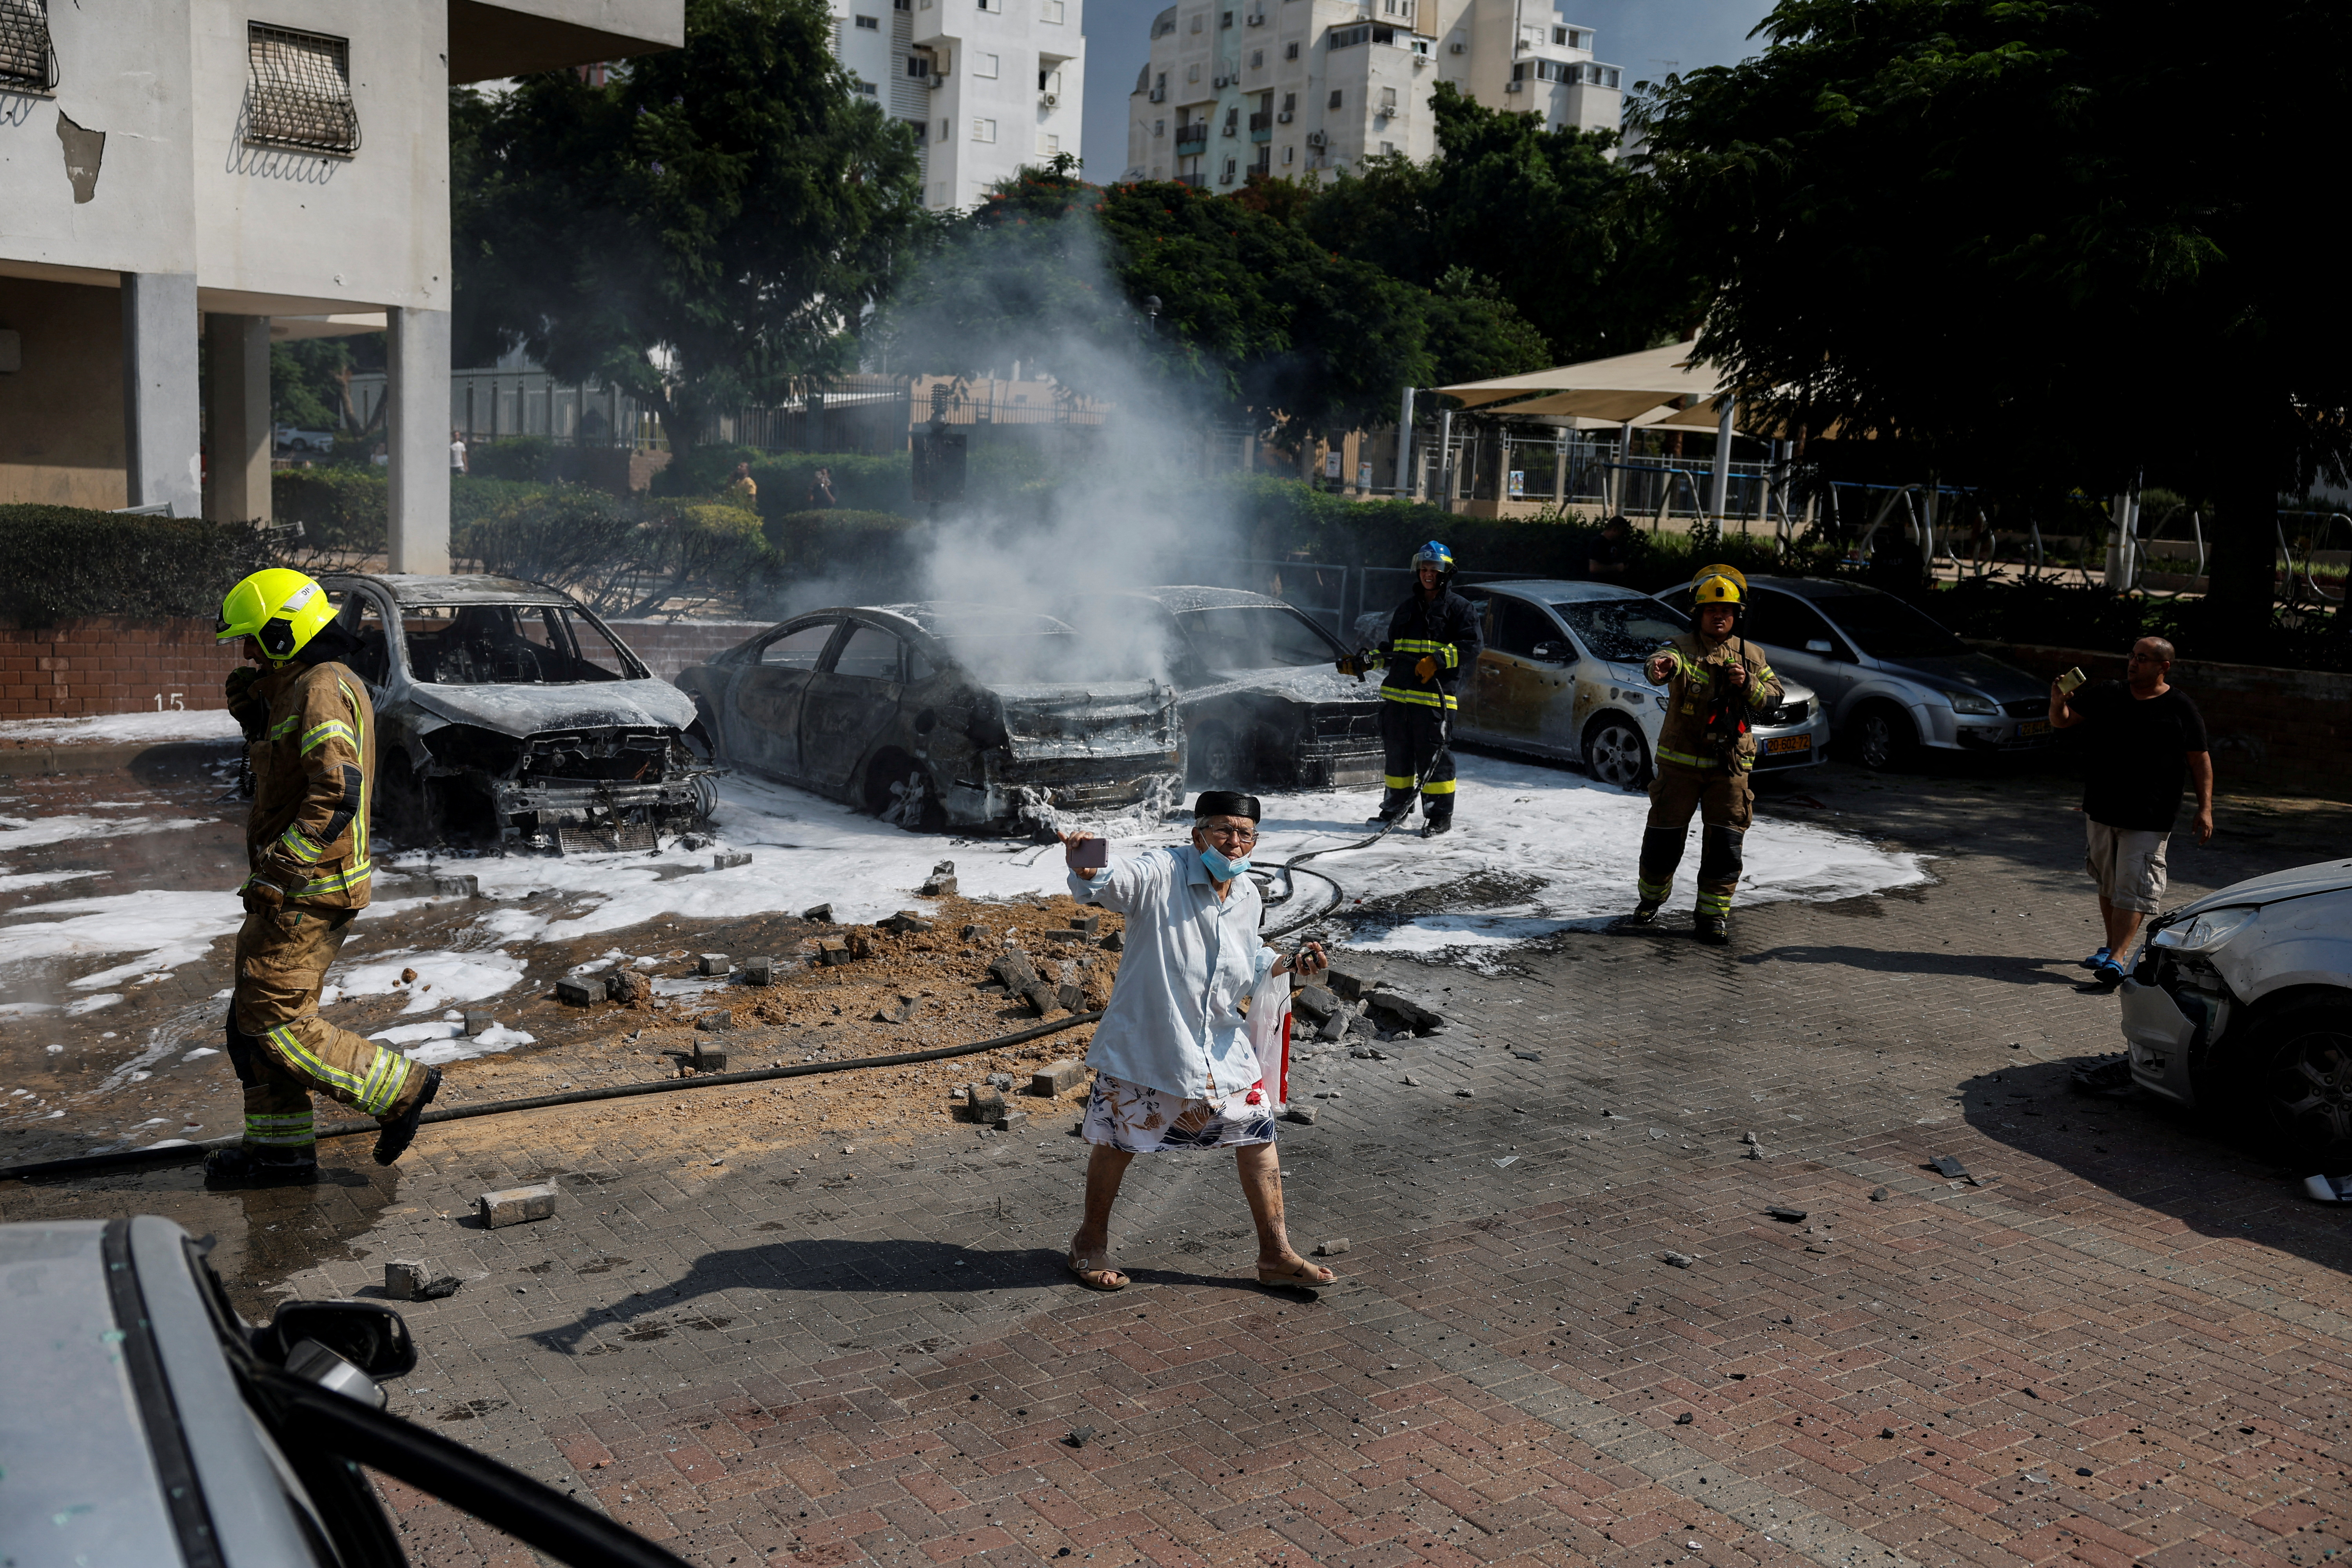 Israeli firefighters work to put out vehicles on fire after a rocket, launched from the Gaza Strip, landed in Ashkelon